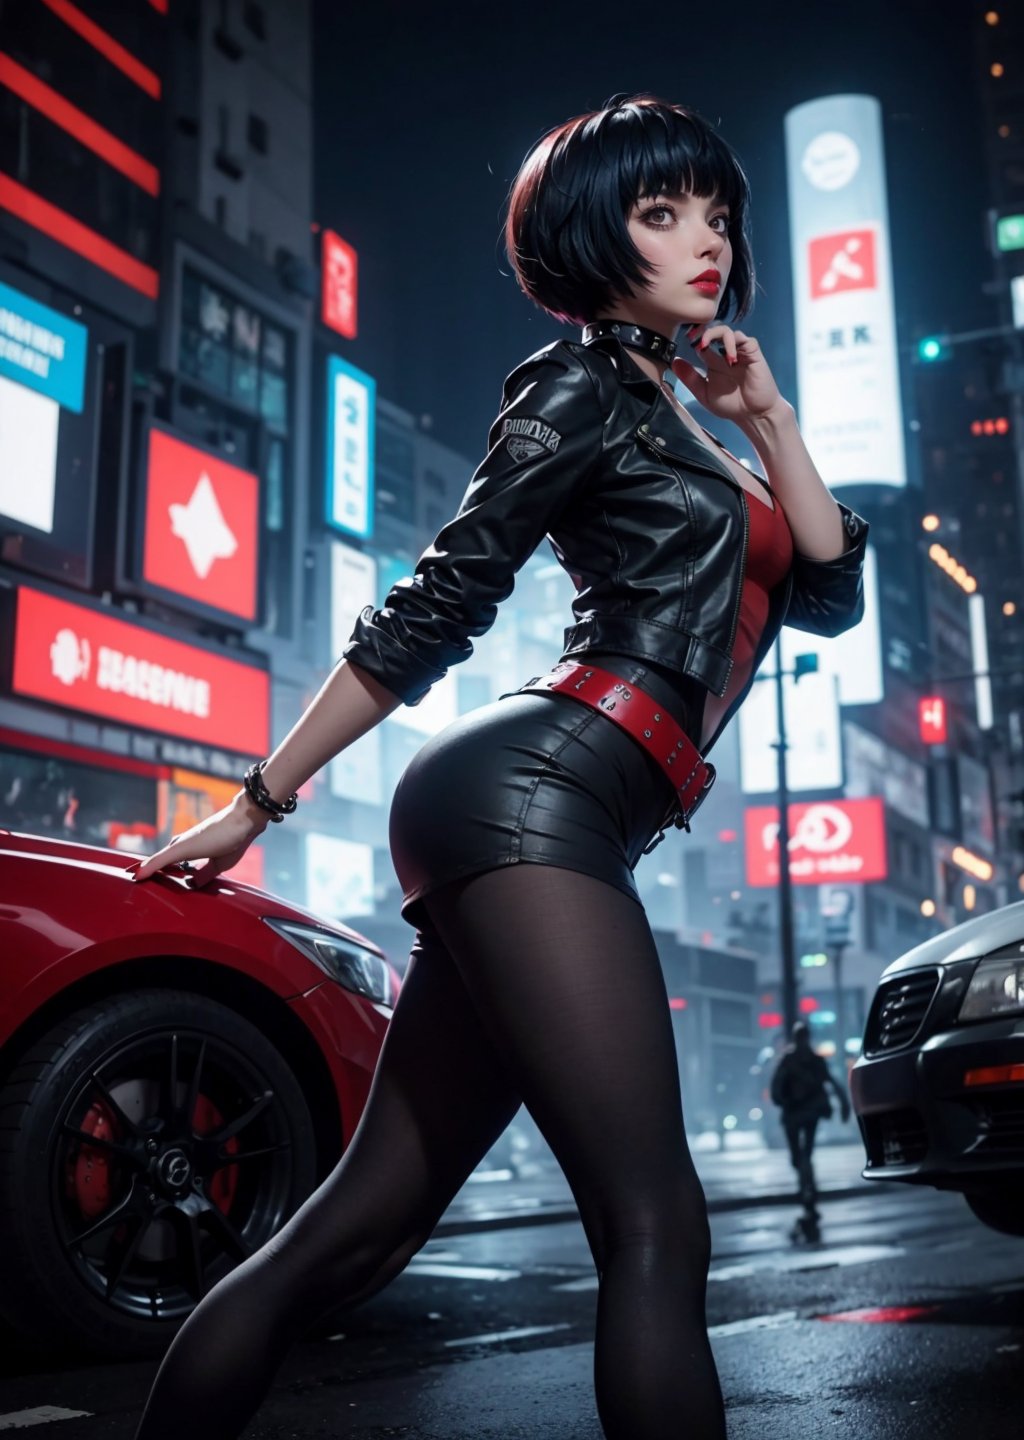 full body, from side, perfect body, maximum quality, shot, 1_girl, cyberpunk scene, Tae Takemi, Persona 5 game, blue dark hair, pink lips, punkrock clothes, neck bone, messy bob cut, blunt bangs, brown eyes, red nails polish, short blue dress with a white spiderweb design, black ripped leggings, short black jacket, red grommet belt, choker, midnight, city background, sexy pose, erotic pose, sweating